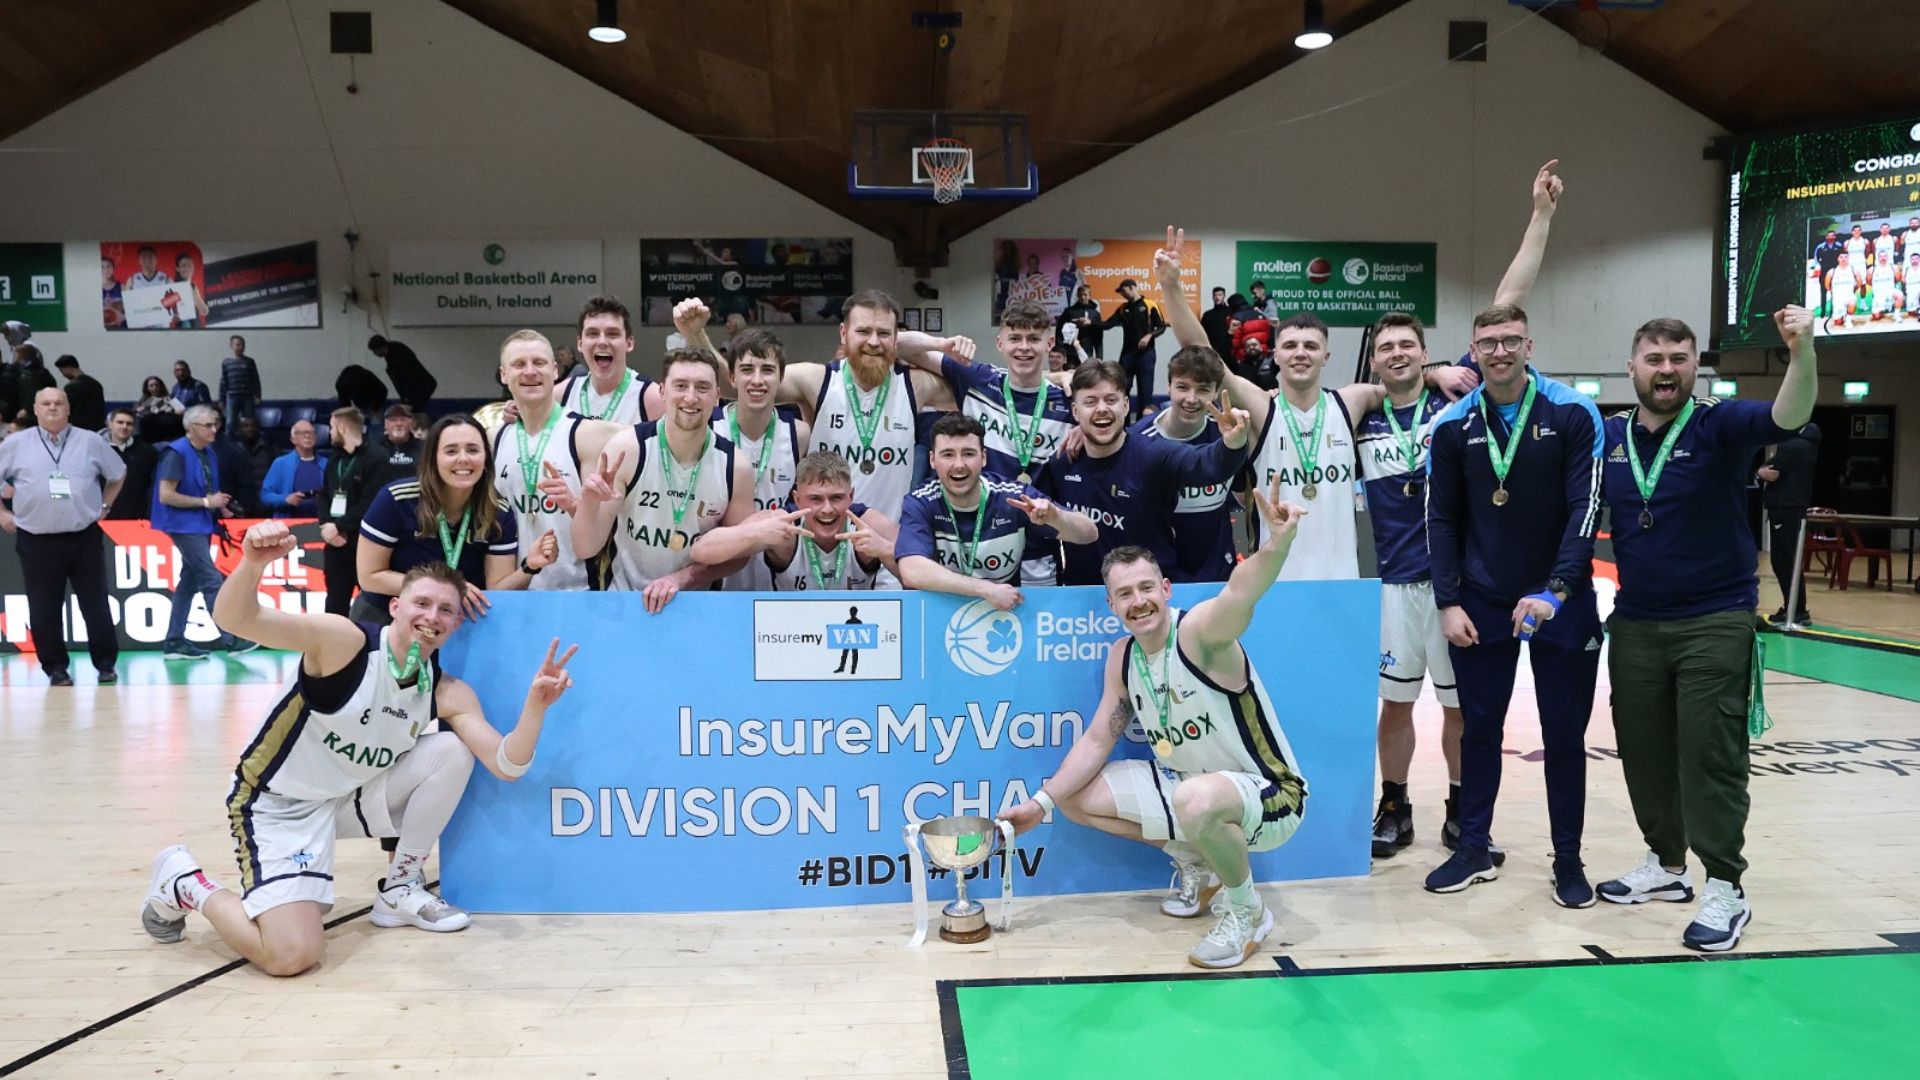 Ulster University celebrate their overtime win over Limerick Sport Eagles that sealed their promotion to the Super League 